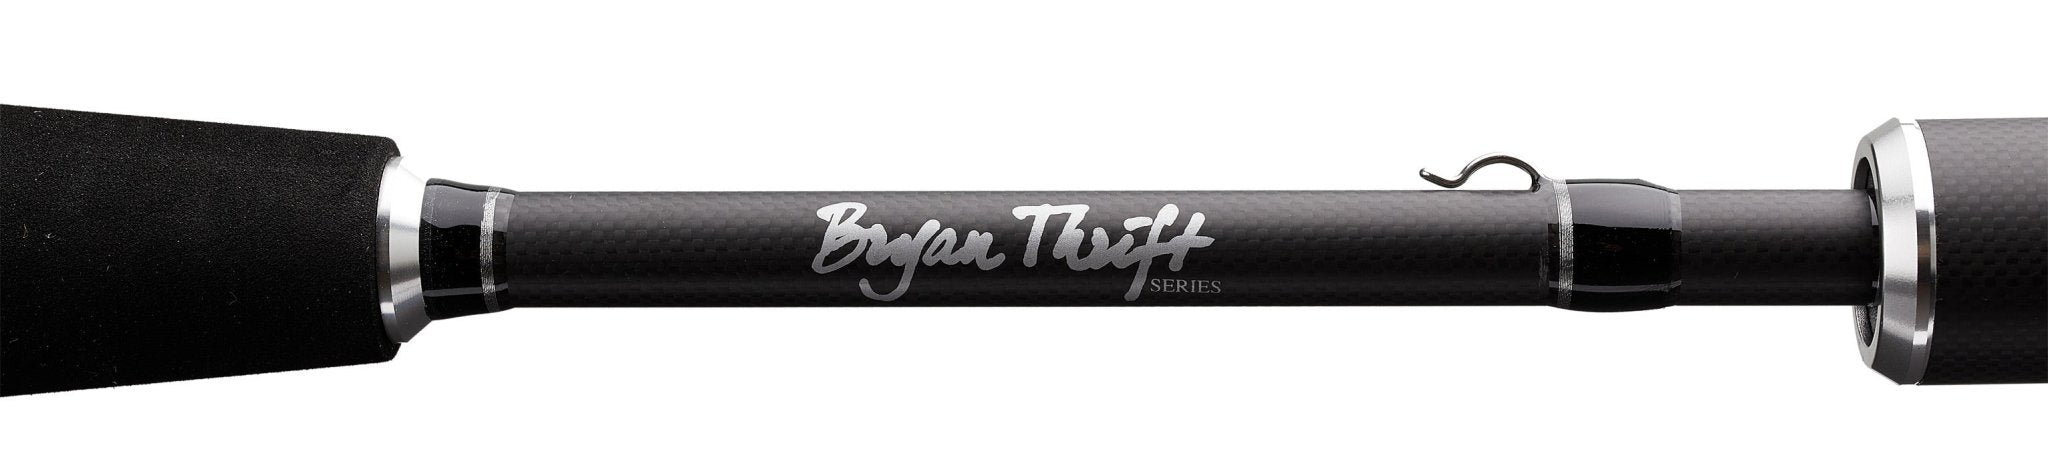 Fitzgerald Fishing Bryan Thrift Series Spinning Rods - Hamilton Bait and Tackle